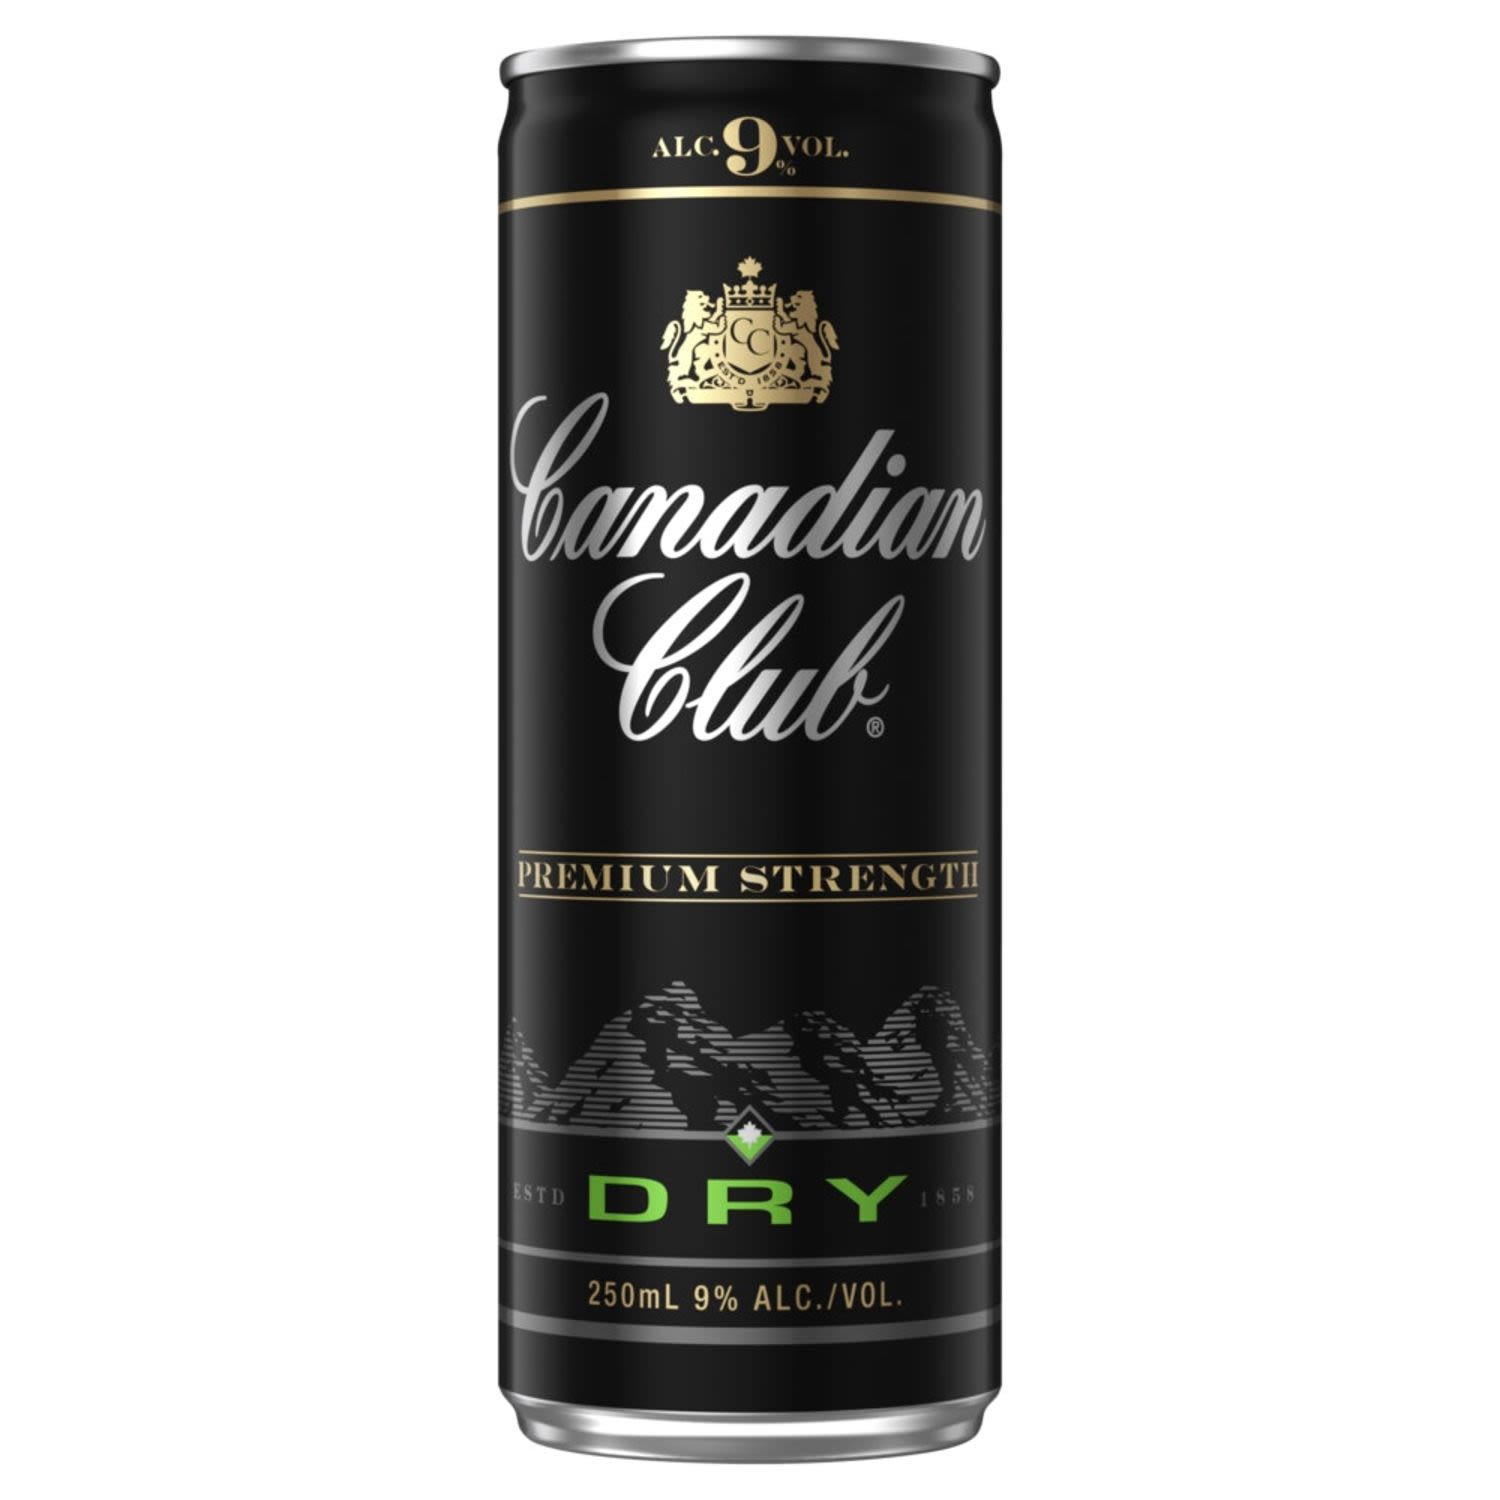 Canadian Club Dry Premium 9% has a smooth, fuller flavour, mixed with a less sweet dry ginger ale. Enjoy chilled or poured over ice for the ultimate refreshment.<br /> <br />Alcohol Volume: 9.00%<br /><br />Pack Format: Can<br /><br />Standard Drinks: 1.8</br /><br />Pack Type: Can<br />